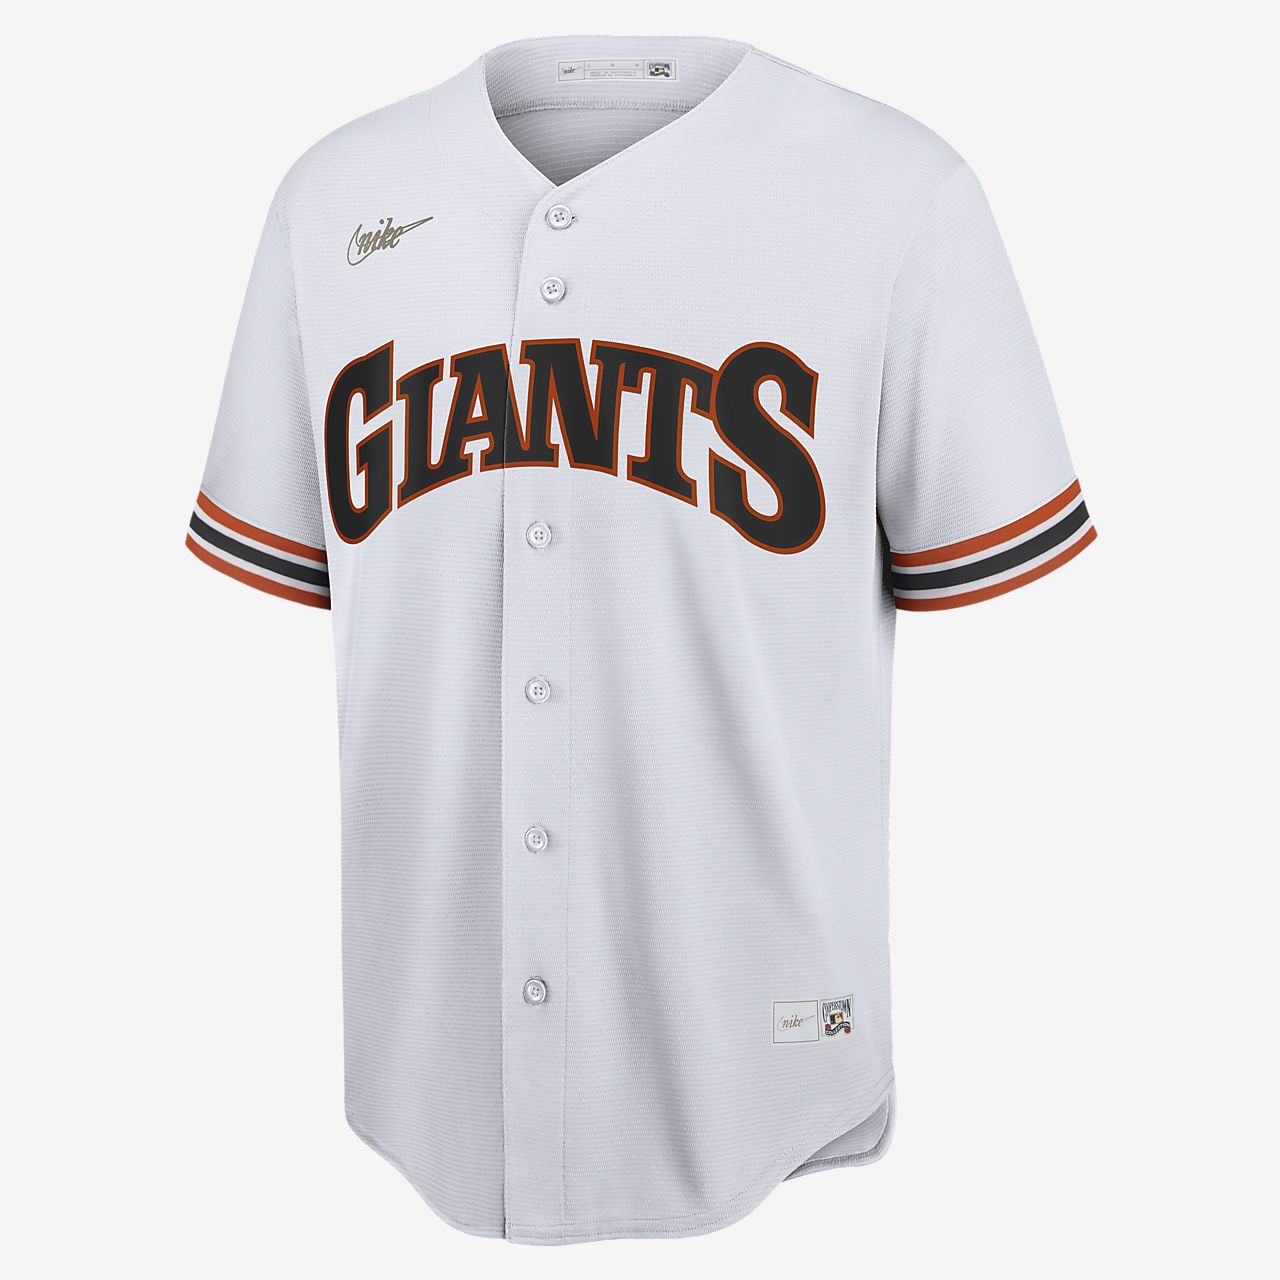 what giants jersey should i get